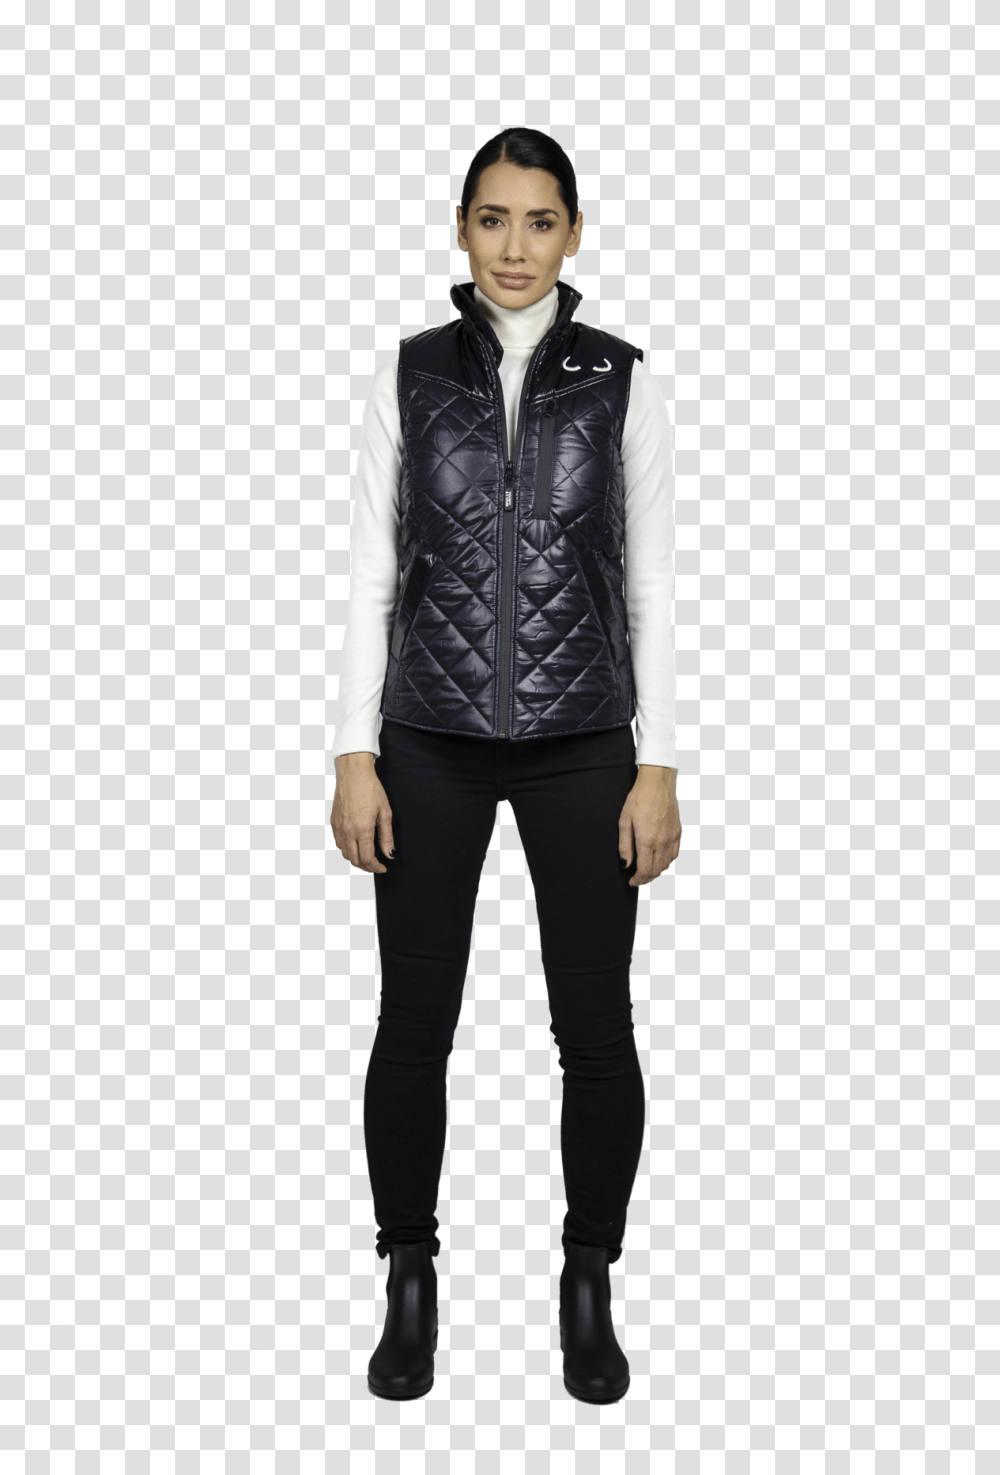 Wuxly Movement, Person, Sleeve, Pants Transparent Png